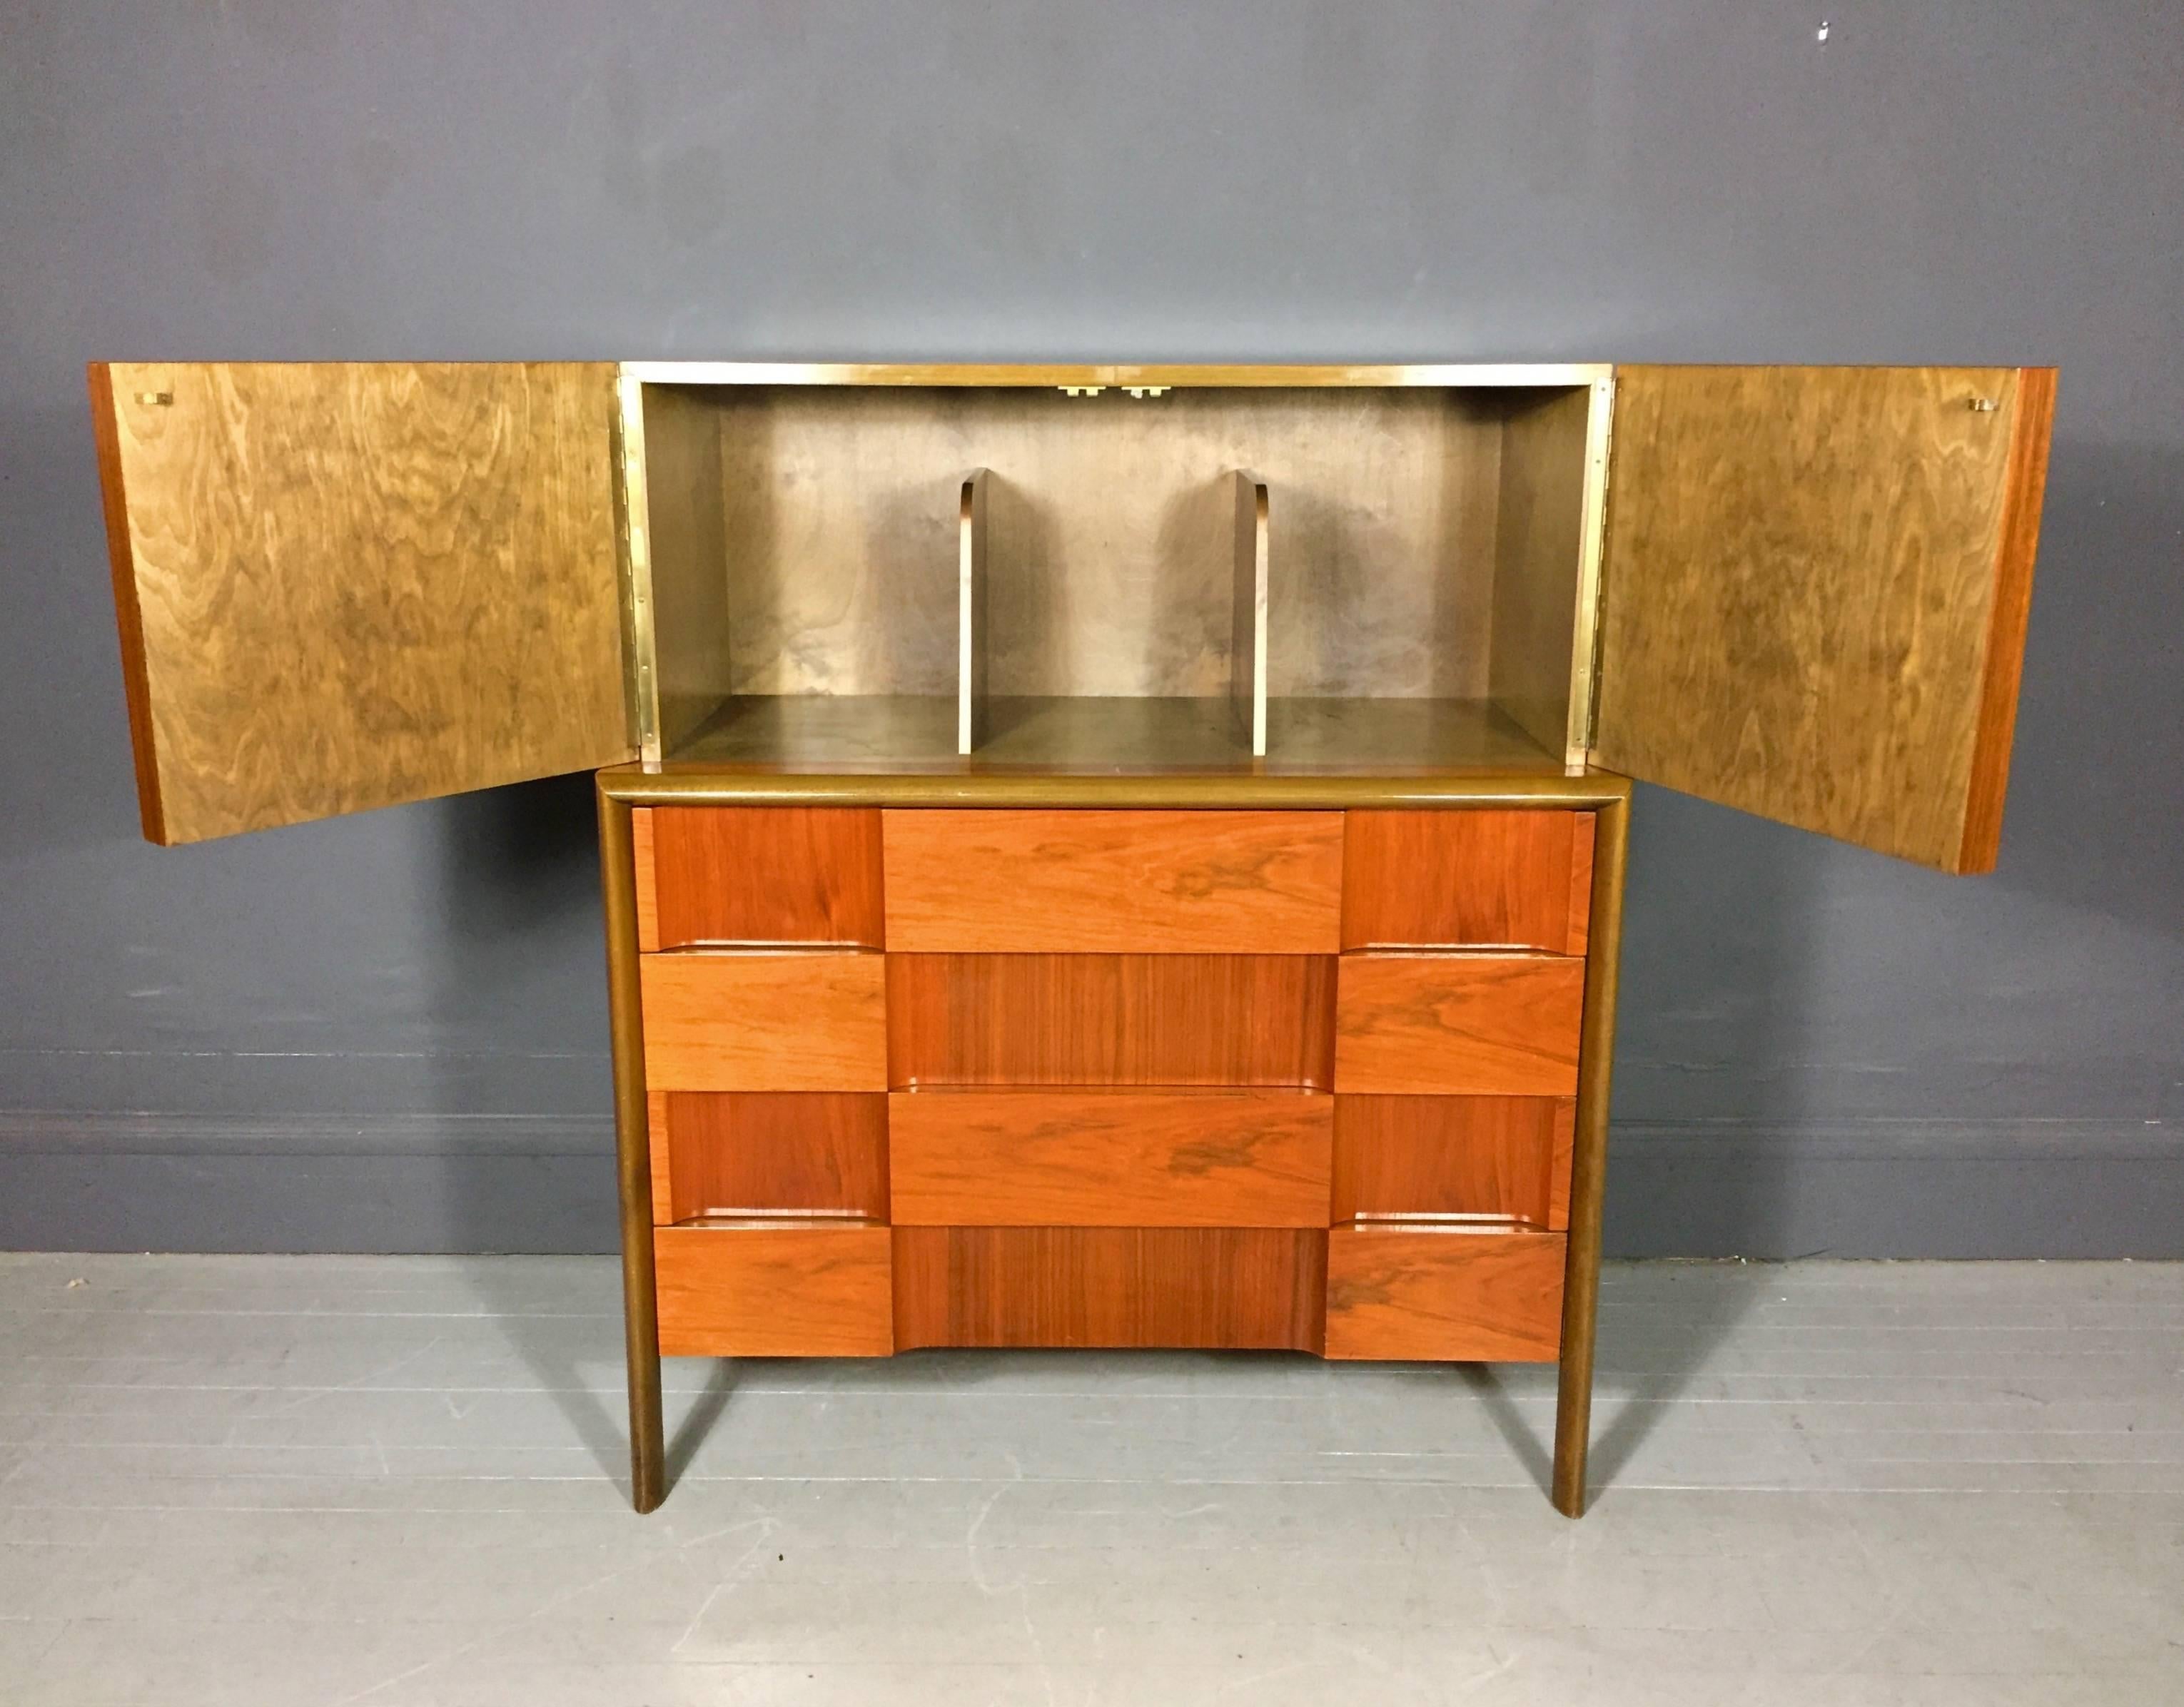 Beautiful and architectural tall chest in alternating geometric walnut veneers, four lower drawers and a top cabinet with two doors, base is accented by carved beech trim. Edmond J. Spence, Sweden, 1950s.

Minor veneer loss to top of one drawer